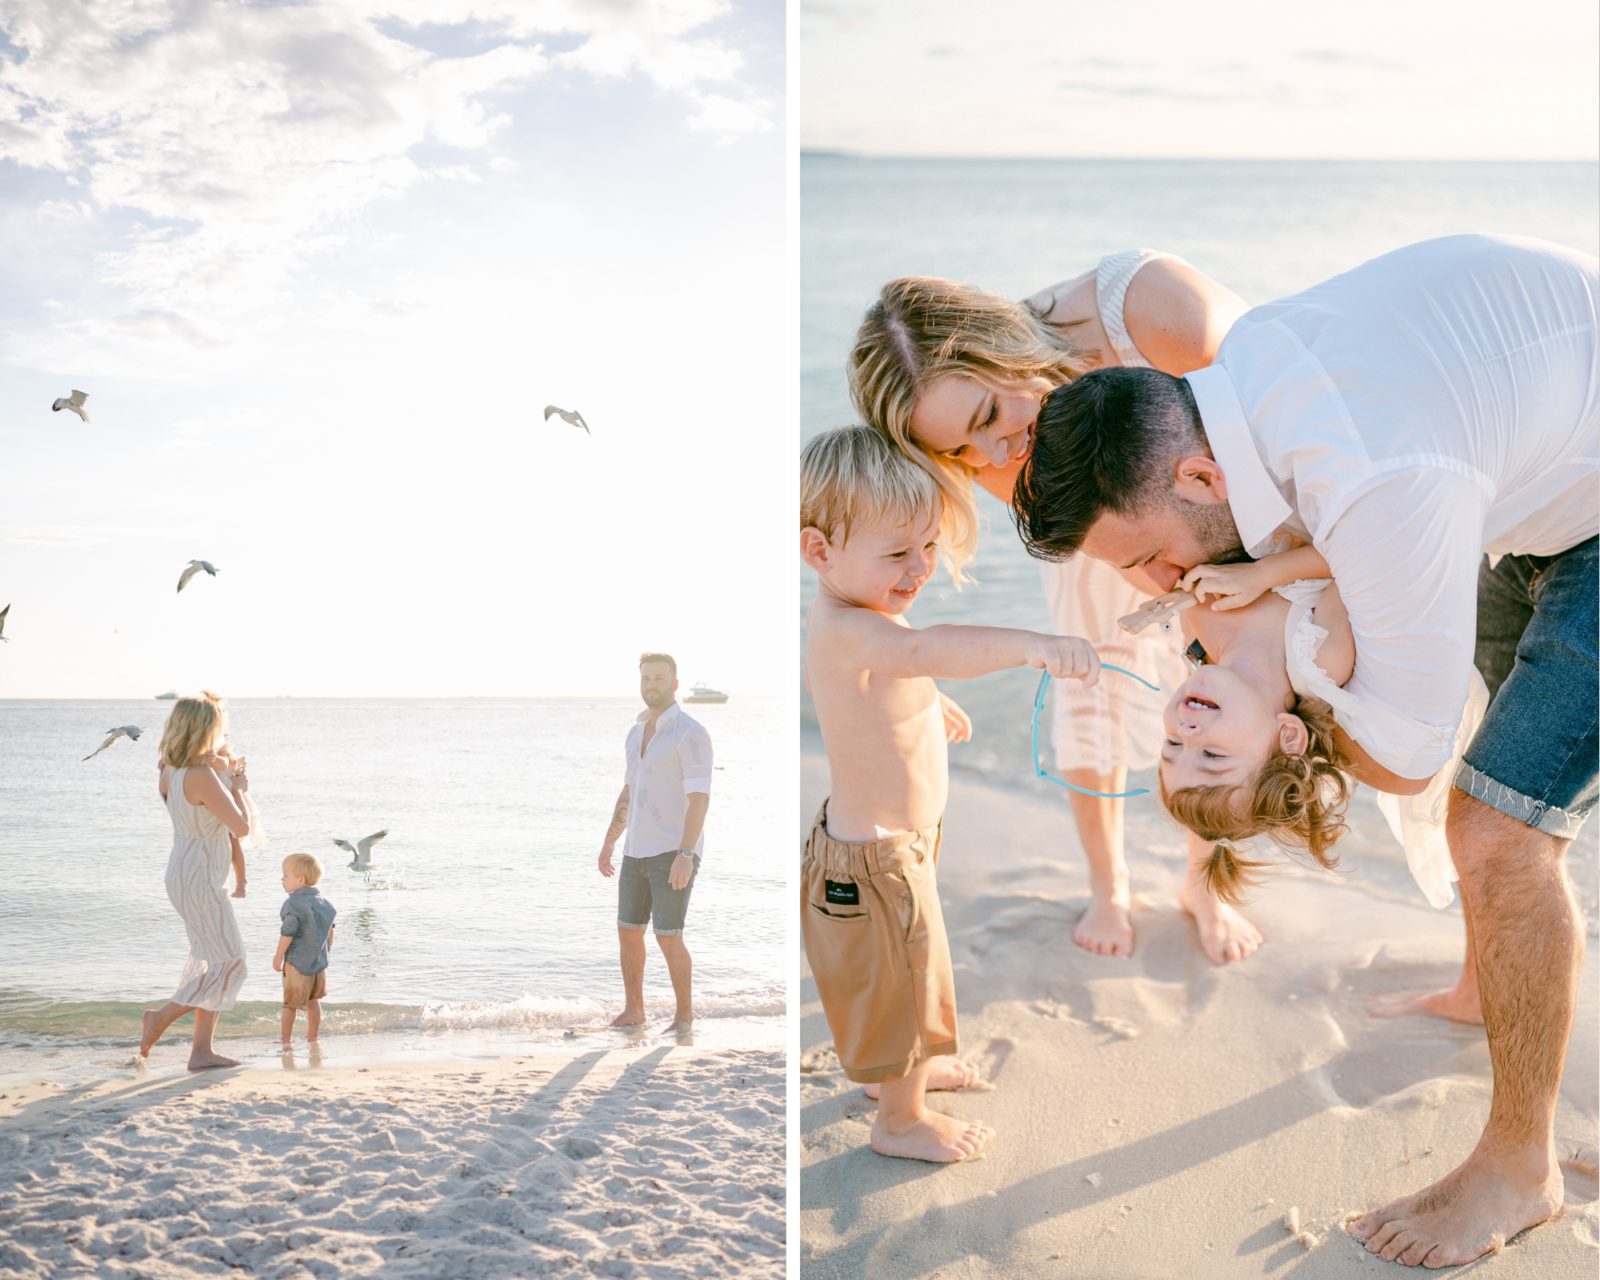 South Florida Family Photographer Favorite Locations Key Biscayne